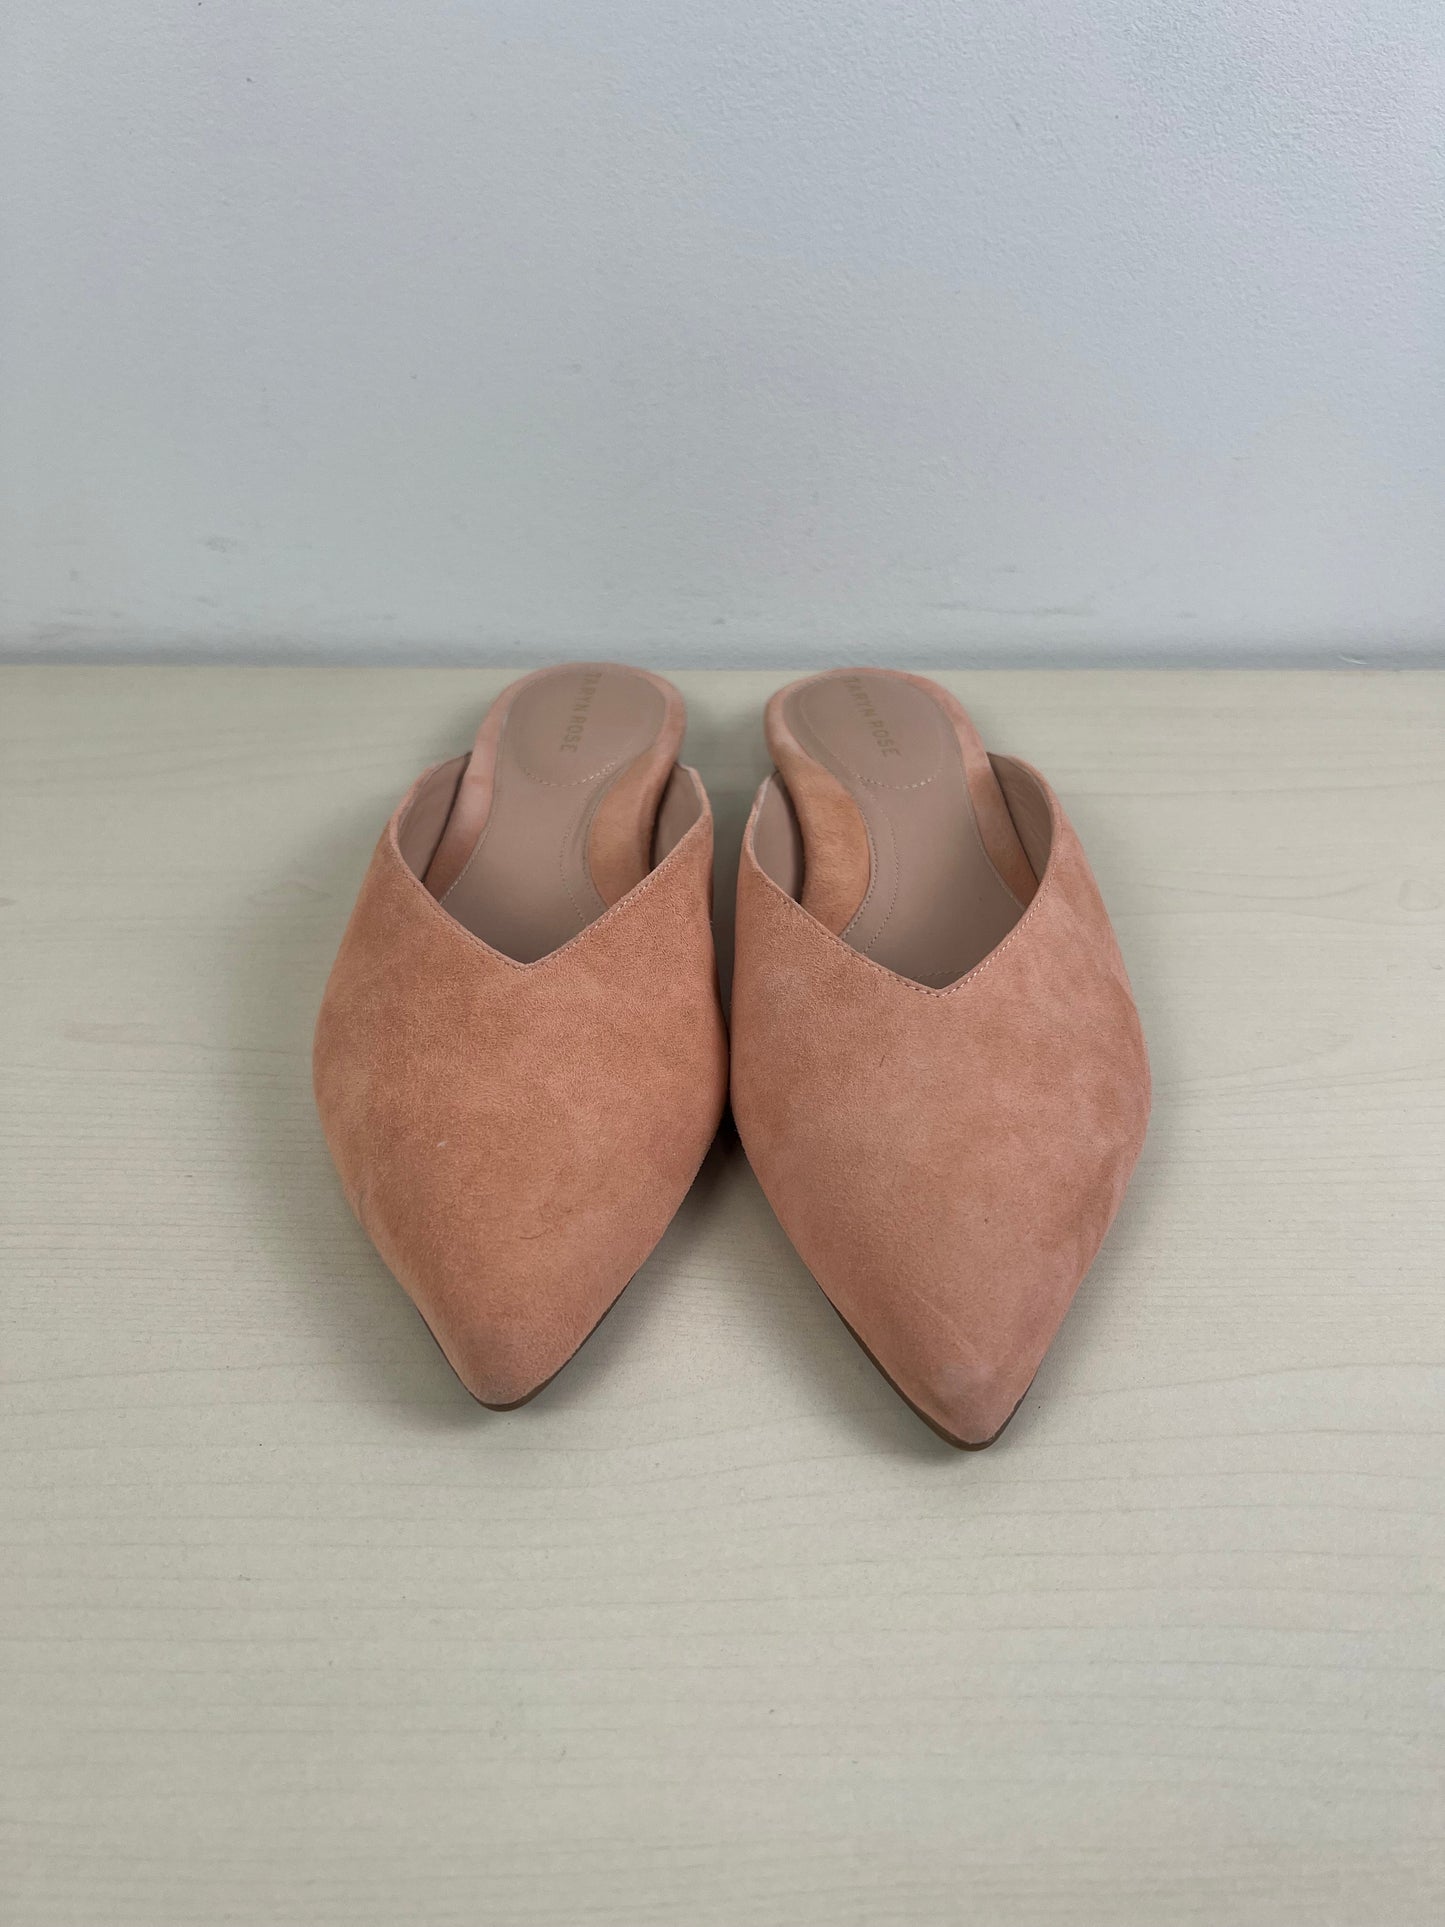 Shoes Flats By Taryn Rose  Size: 8.5